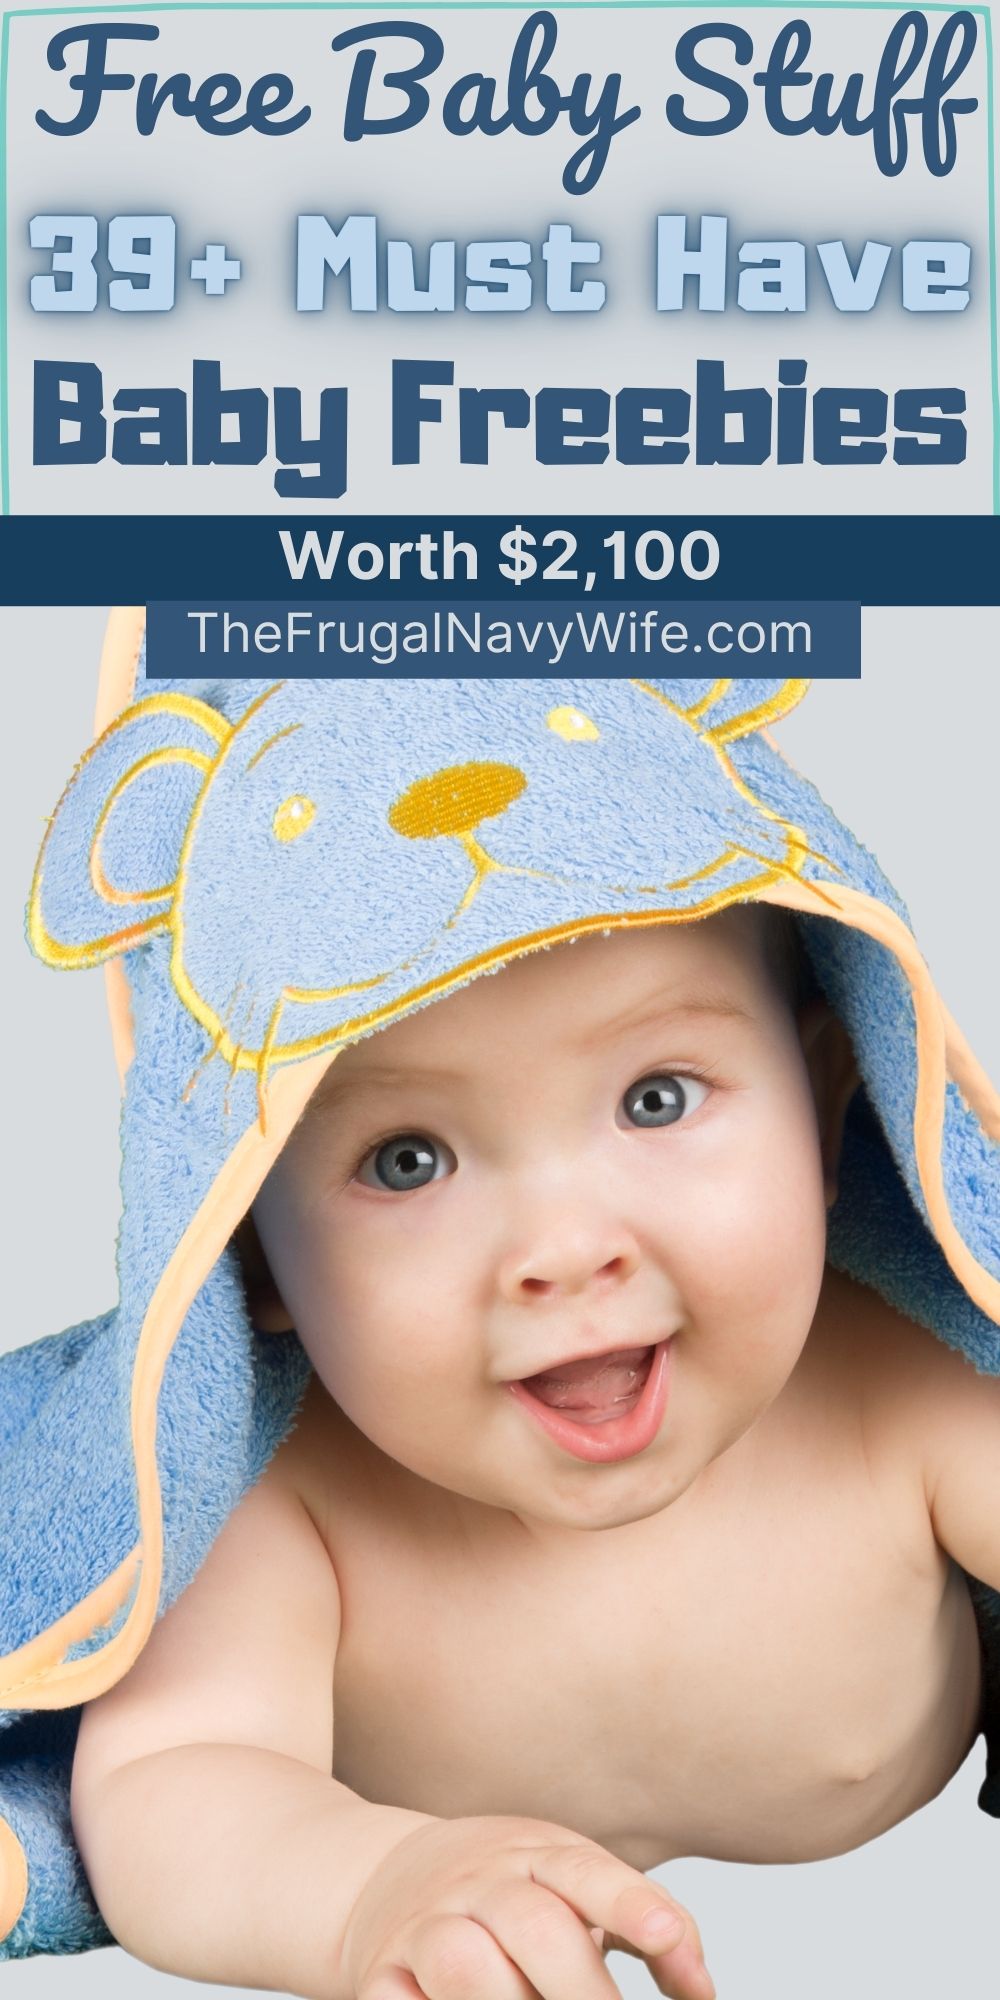 Free Baby Stuff 39 Must Have Baby Freebies Worth 2100 1